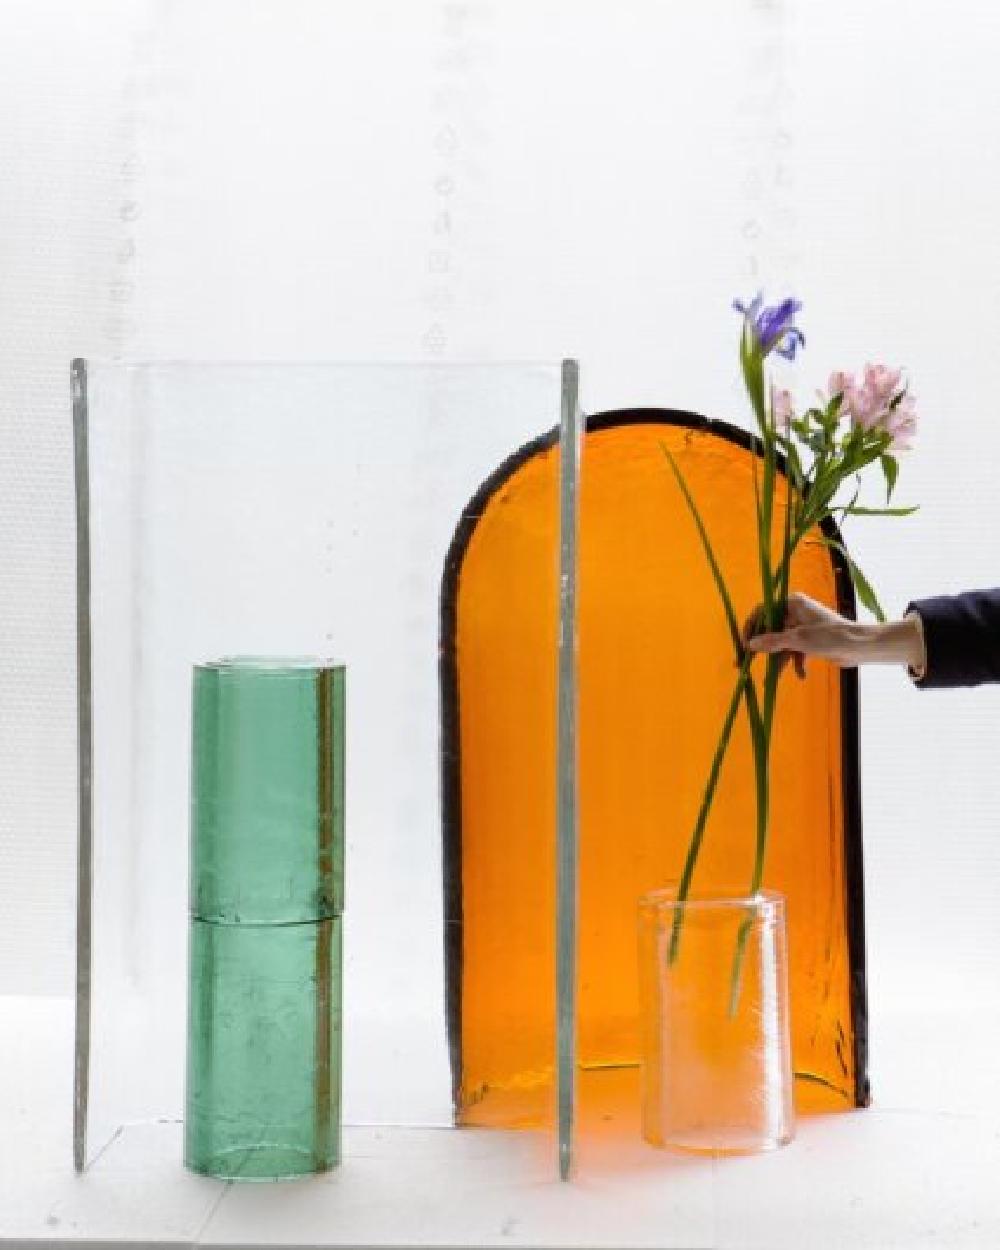 Designed by the internationally renowned French duo, Ronan and Erwan Bouroullec, Alcova is a collection of handcrafted, geometric objects whose groupings evoke landscapes. The designers describe the collection as “a series of coloured cast glass